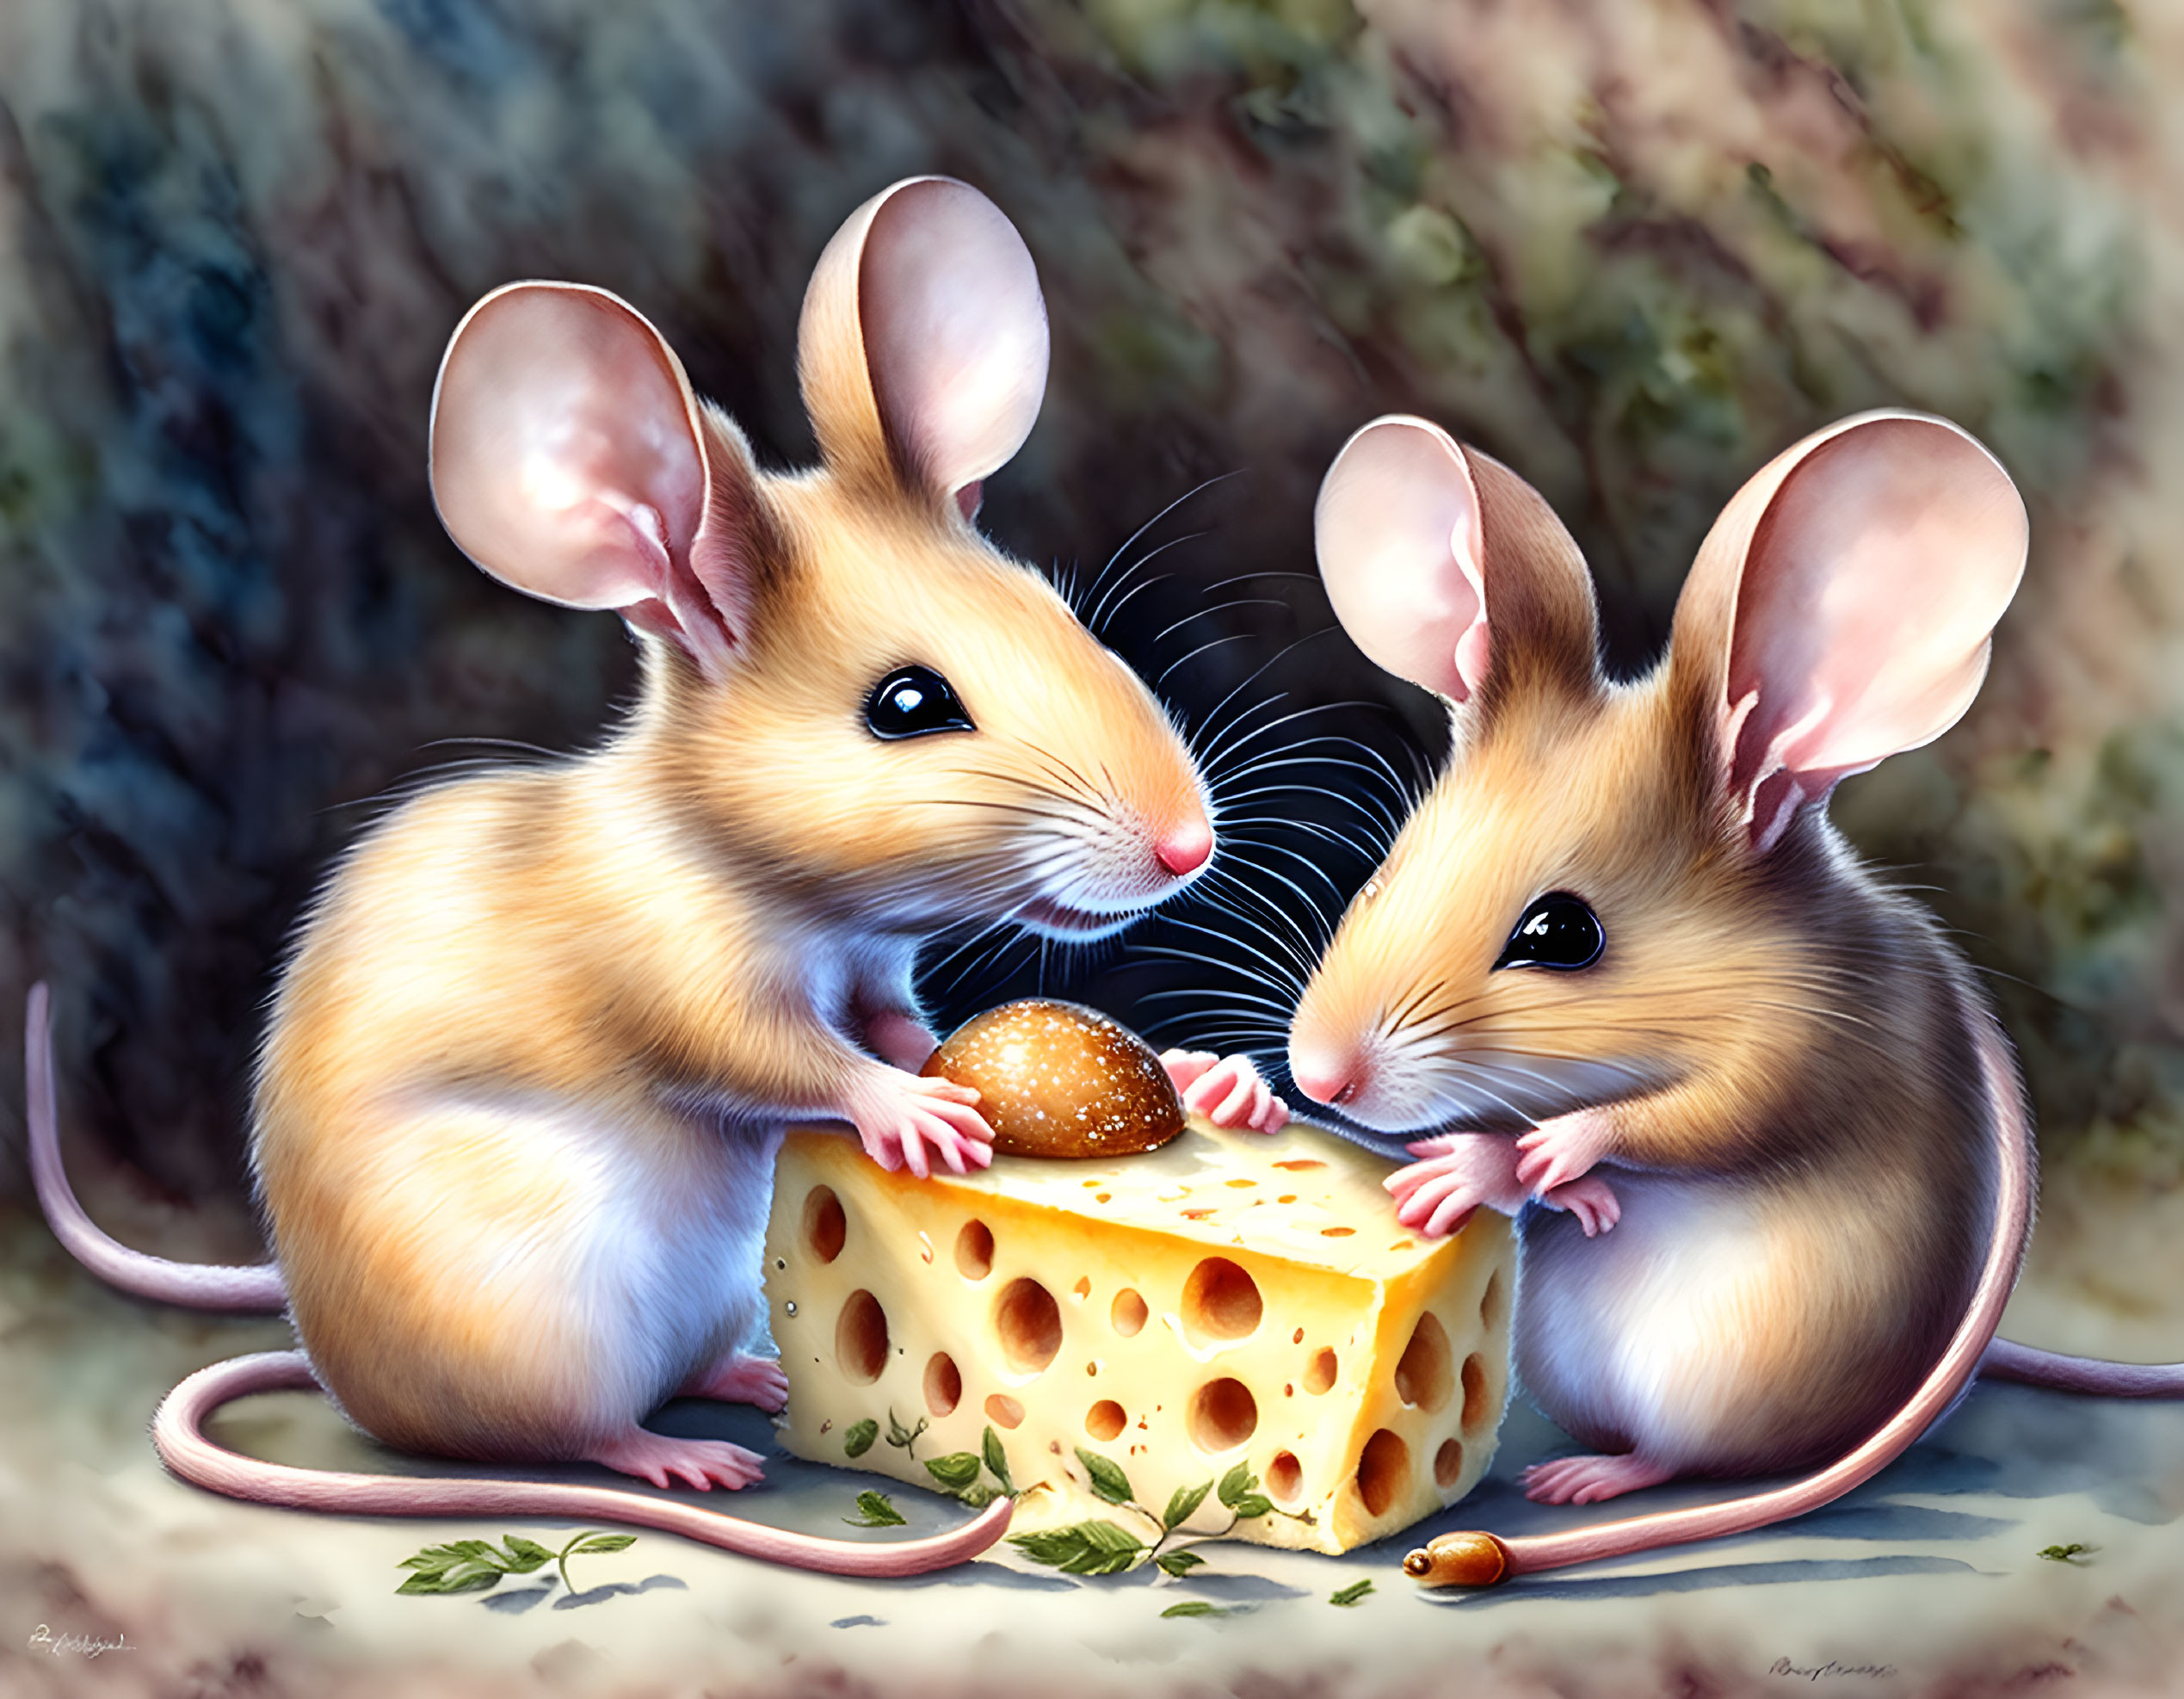 Illustrated mice sharing cheese on soft-focus background